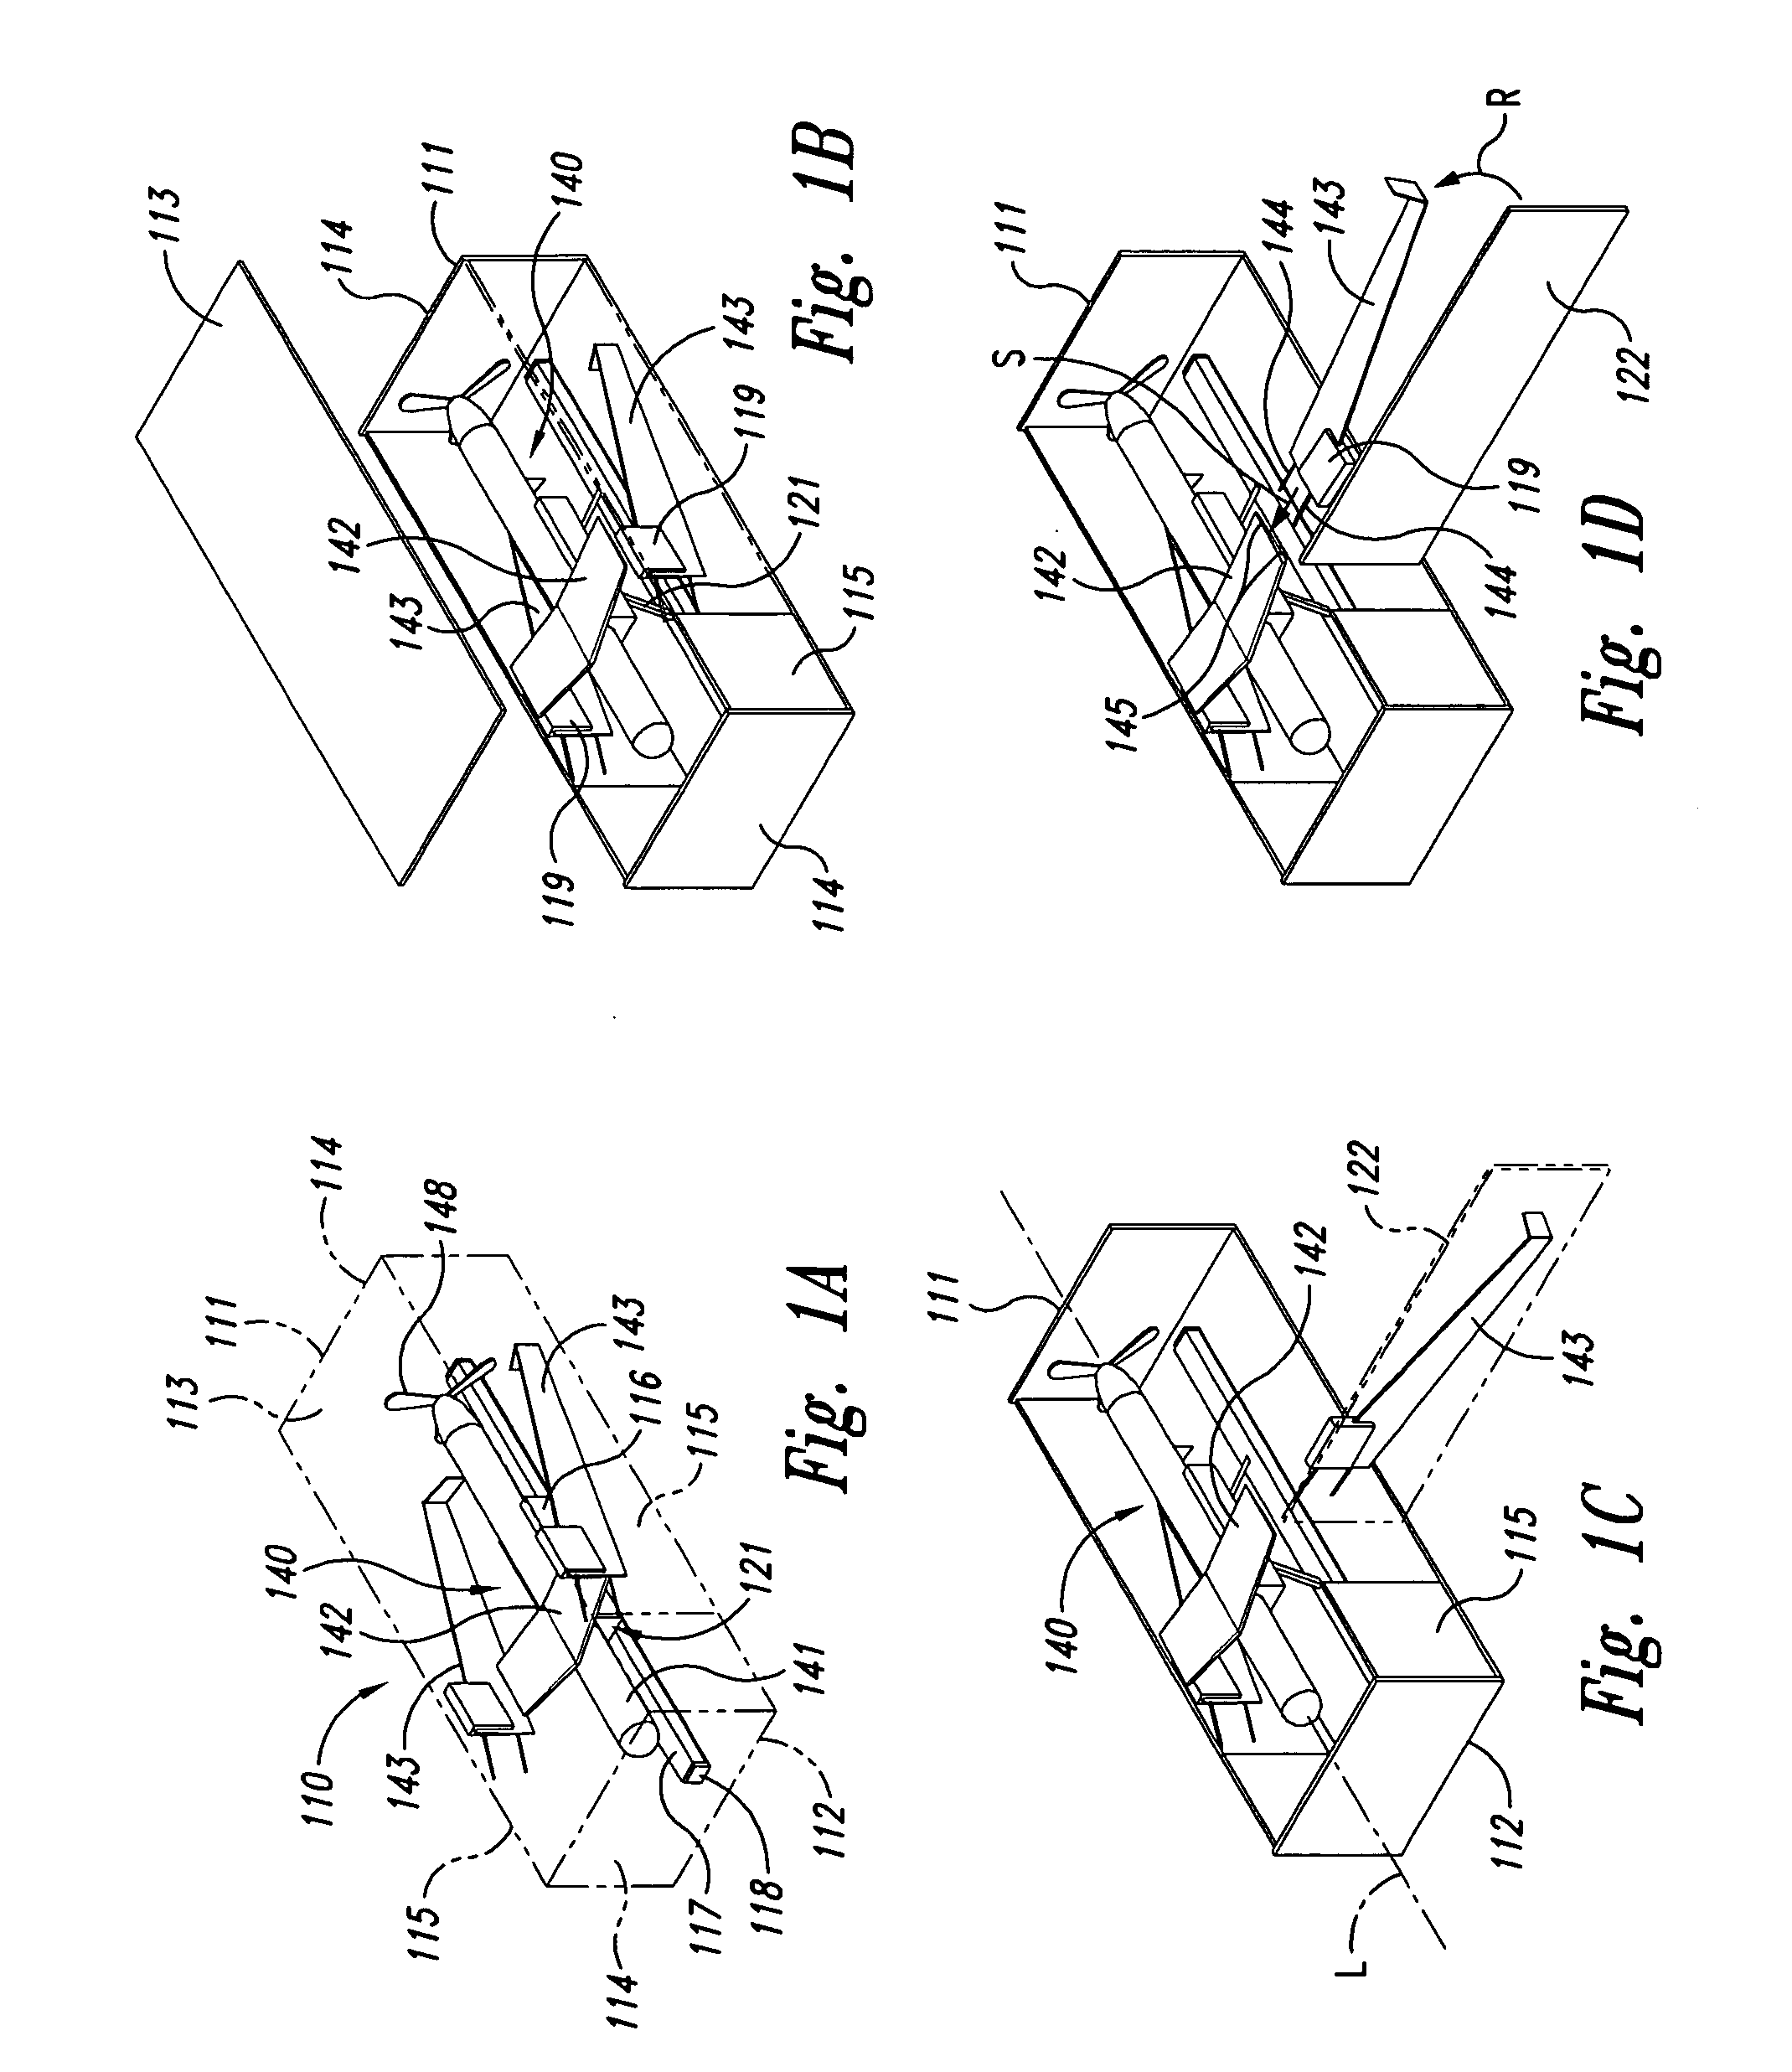 Methods and apparatuses for launching, capturing, and storing unmanned aircraft, including a container having a guide structure for aircraft components